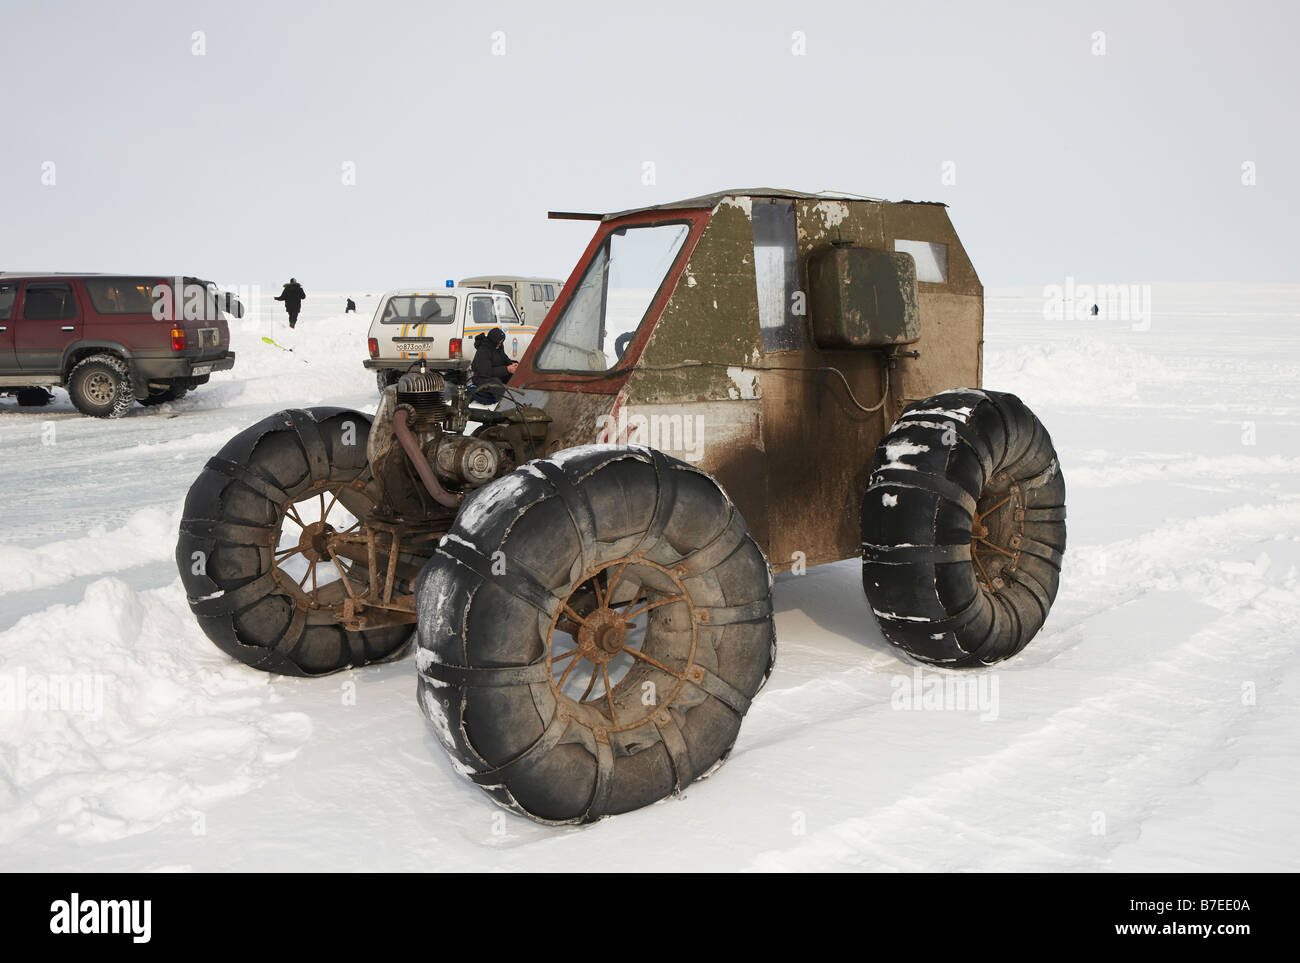 Ice fishing for smelts by homemade 4 wheeler vehicle,  Anadyr Chukotka, Siberia Russia Stock Photo